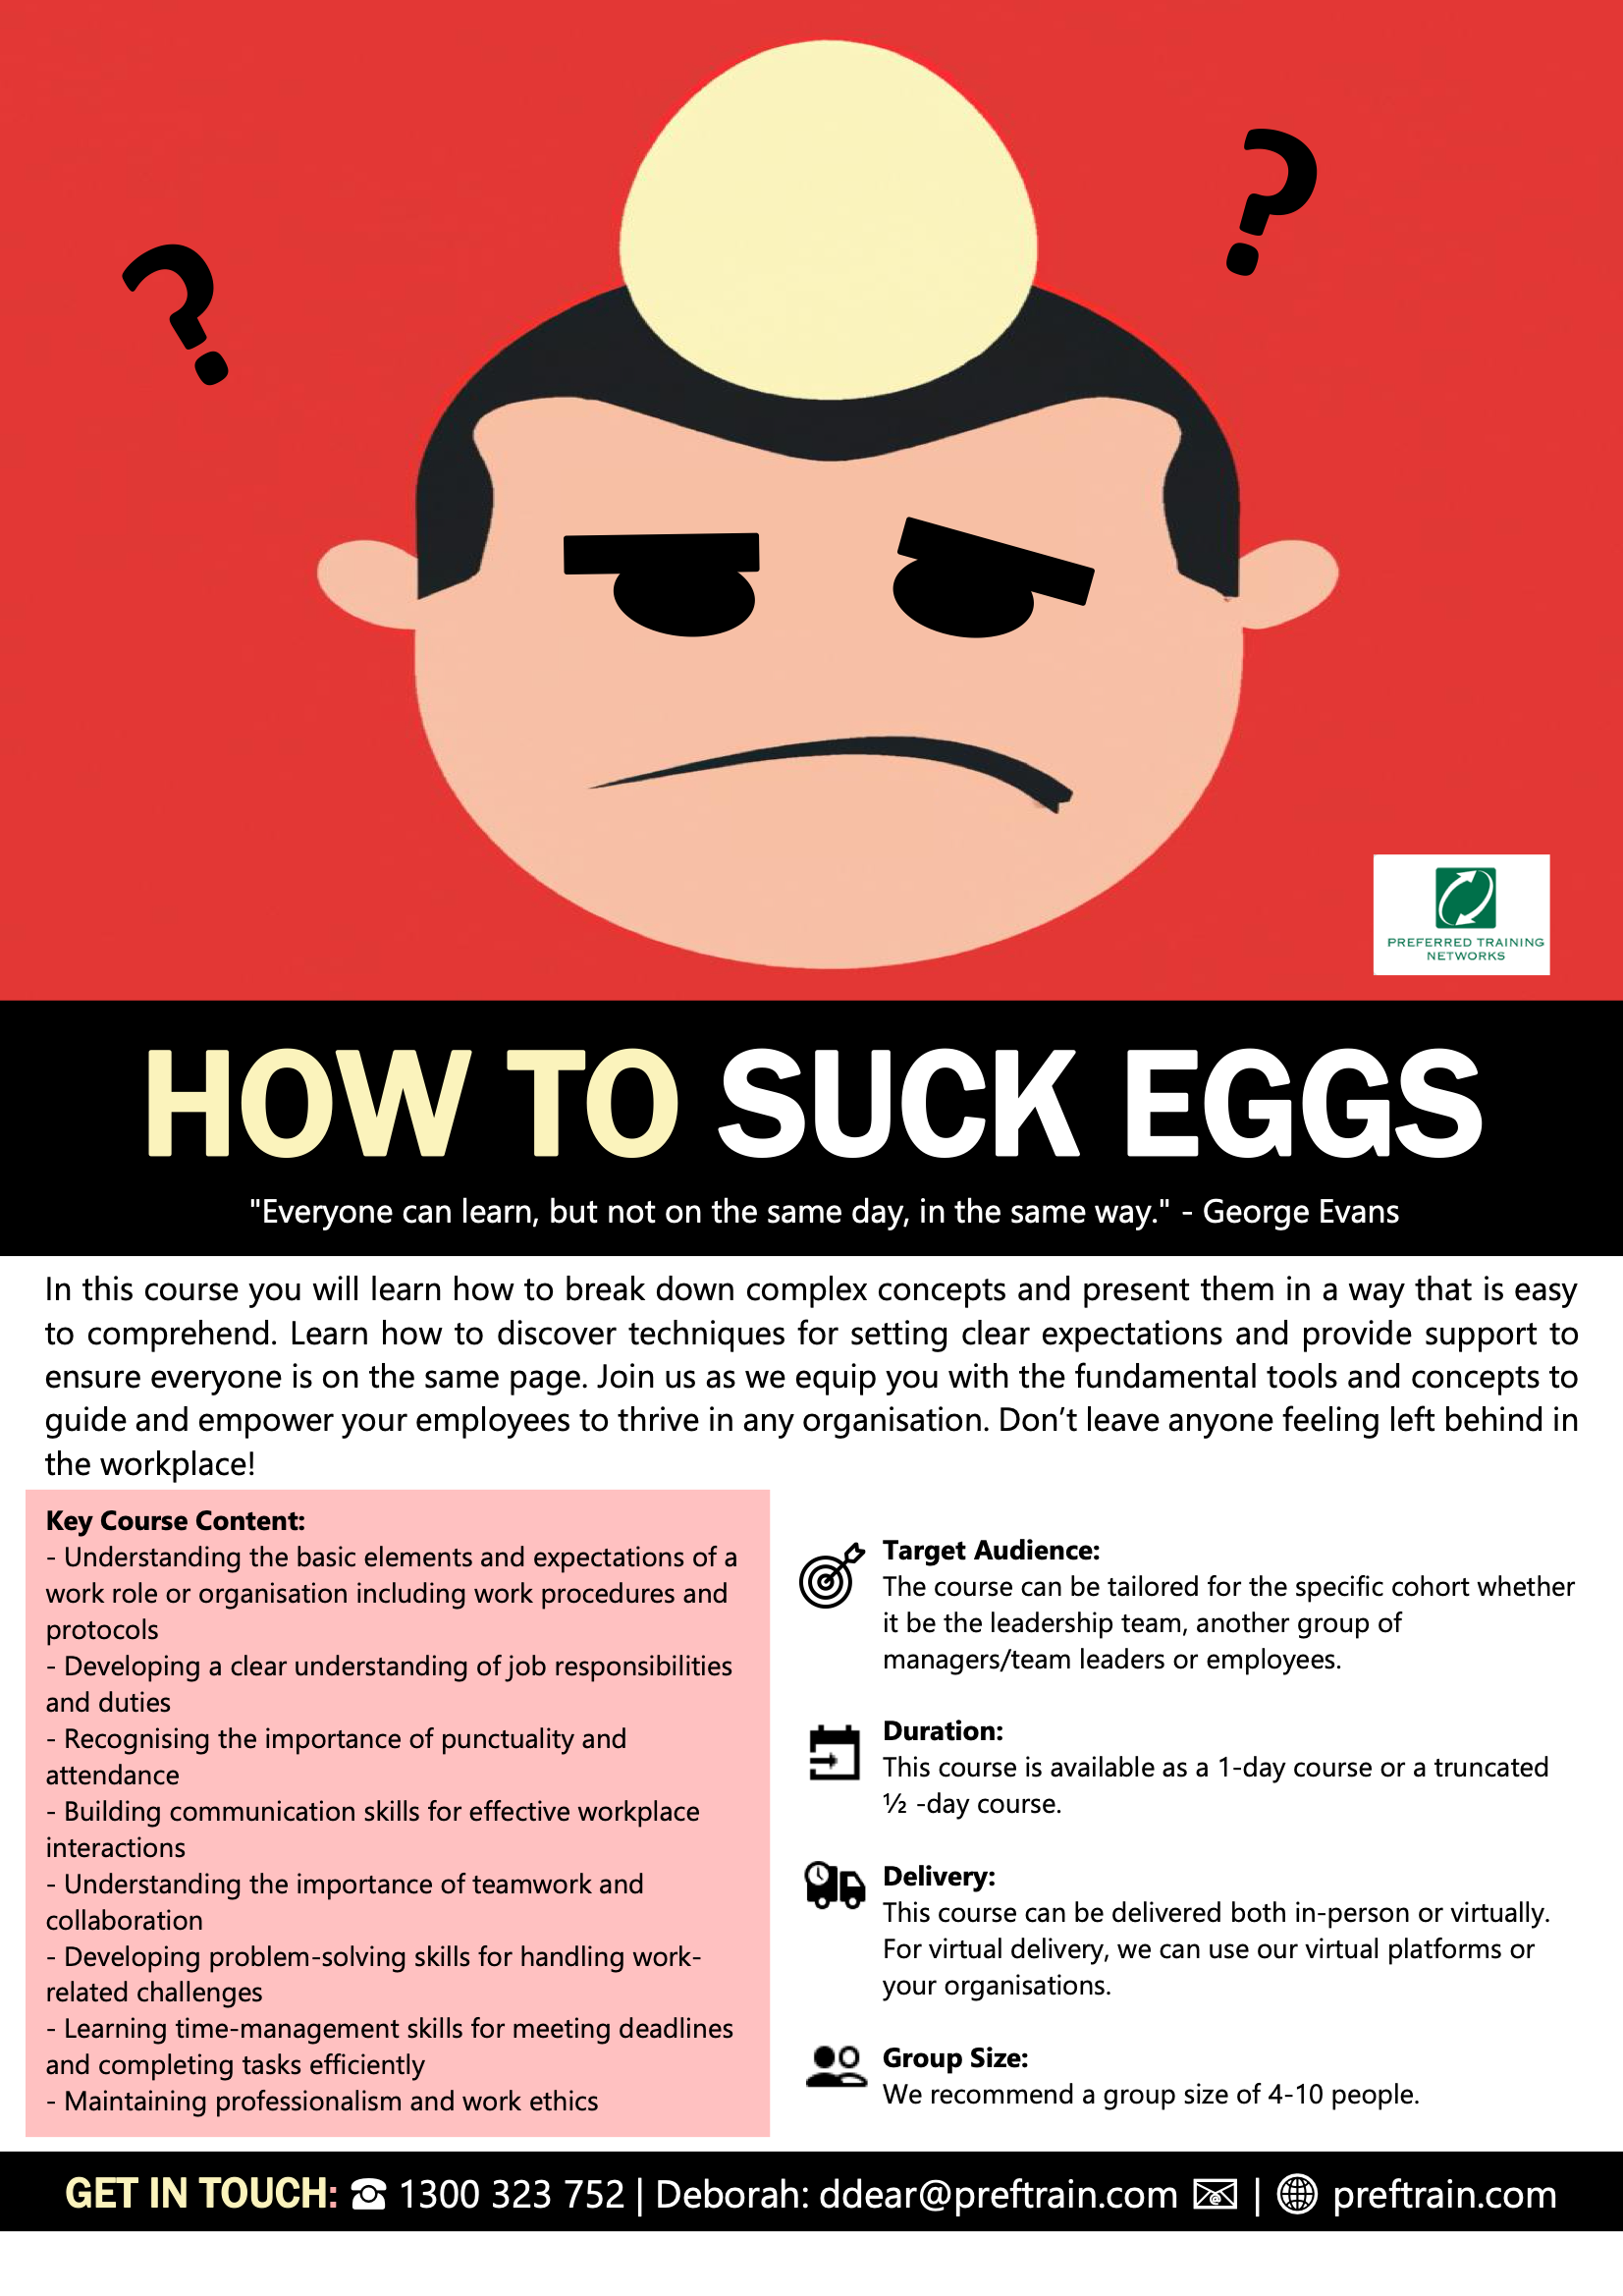 How To Suck Eggs